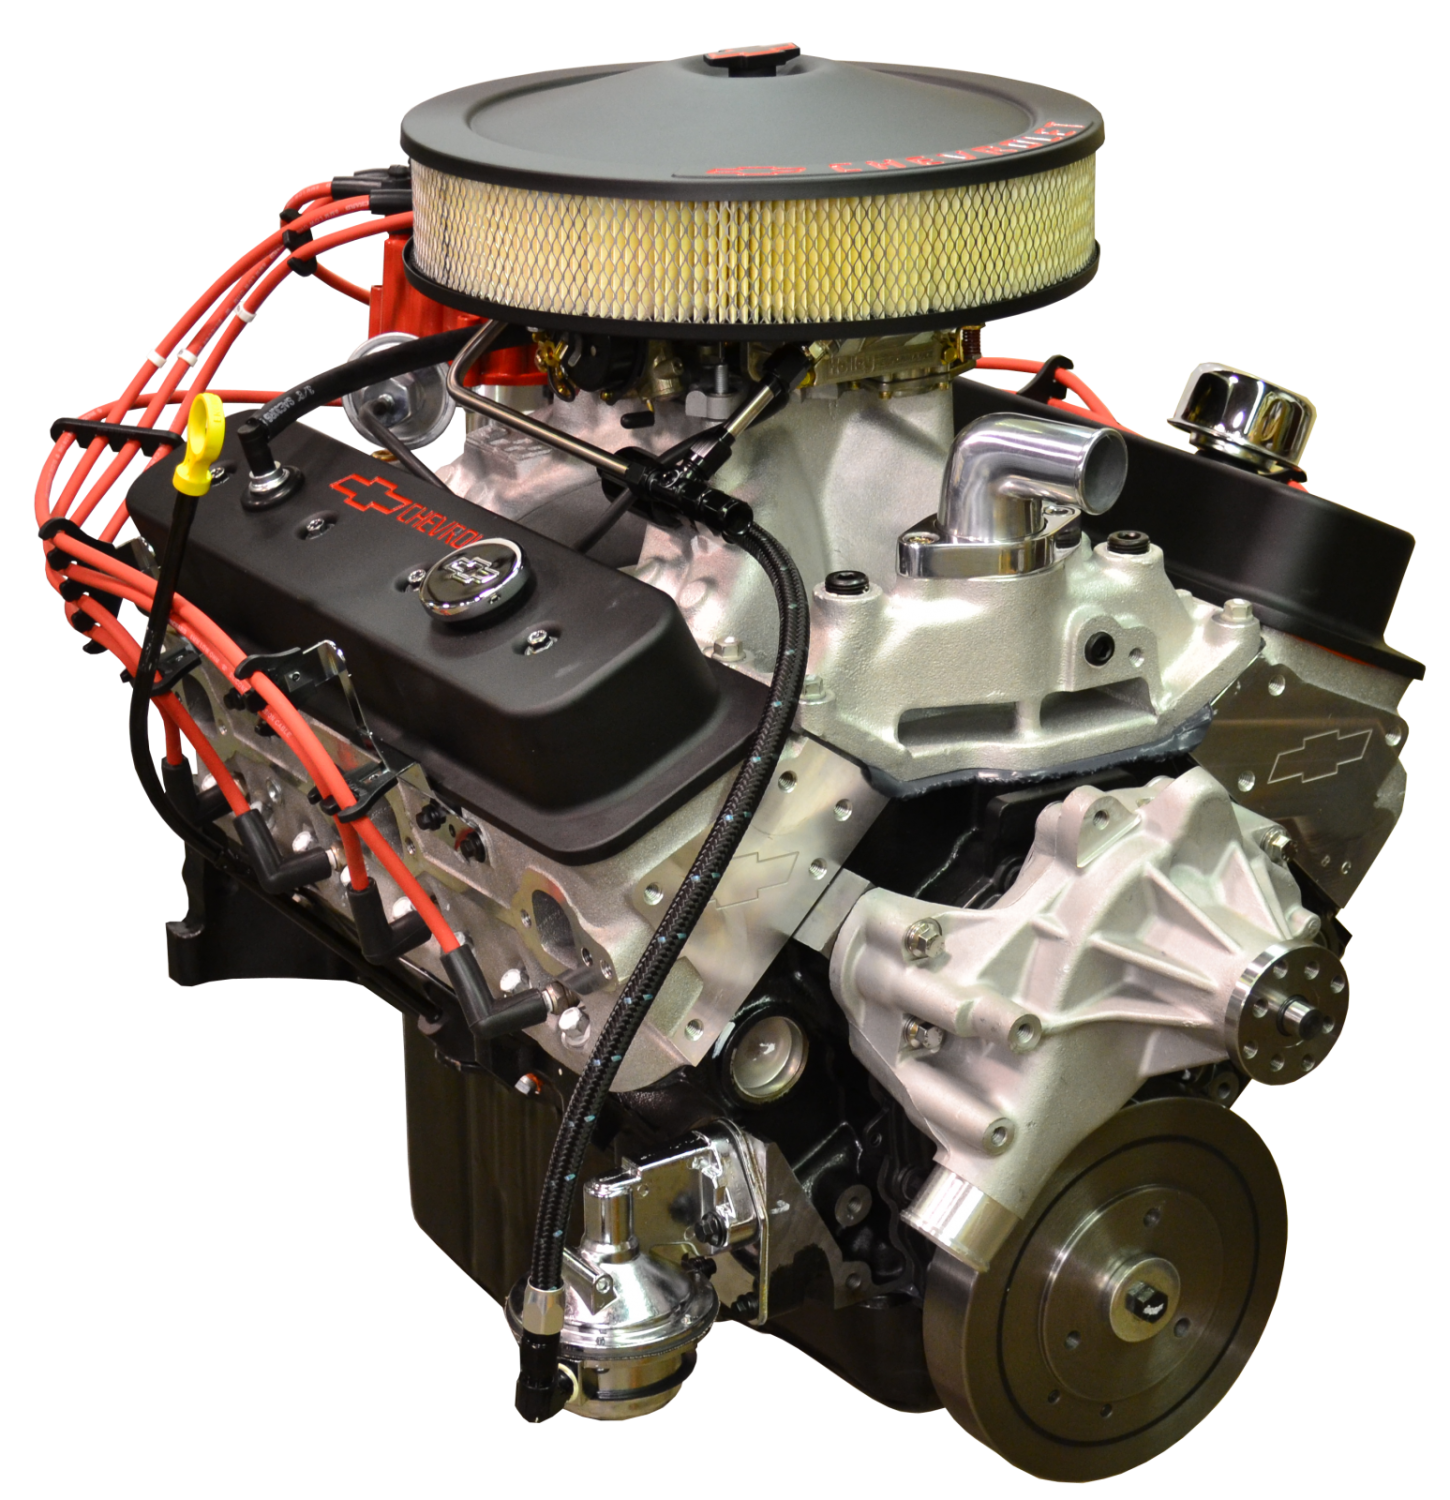 Small Block Crate Engine By Pace Performance Prepped Primed Sp3 435hp Black Finish Gmp 2x